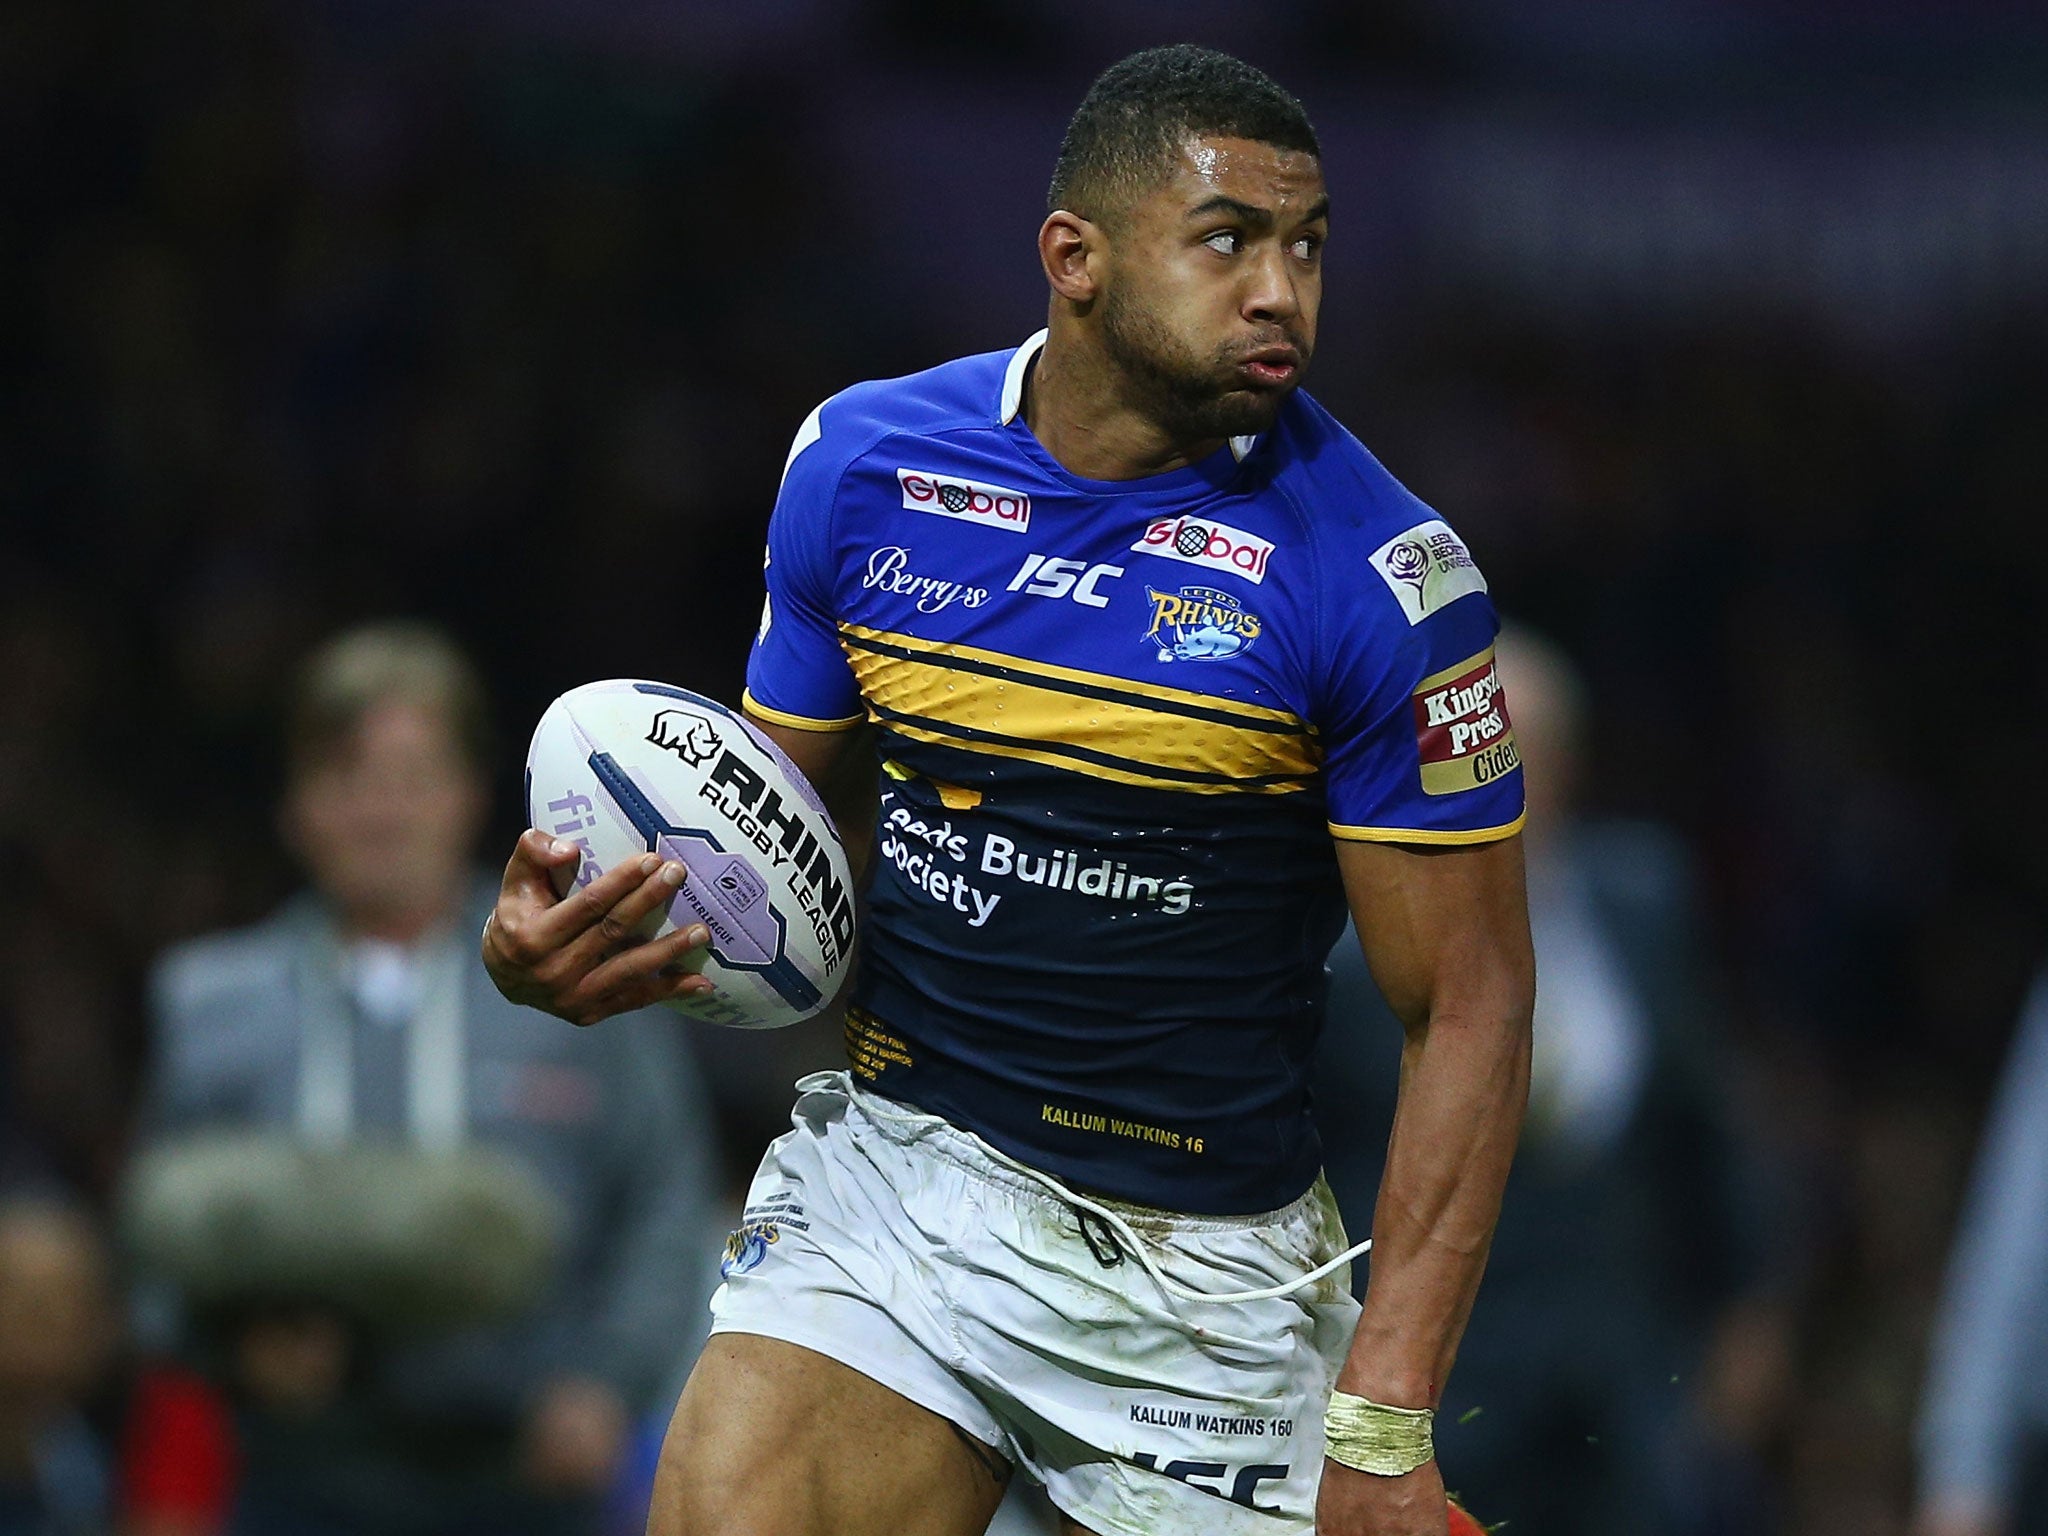 Watkins left Leeds Rhinos after 12 years with the club